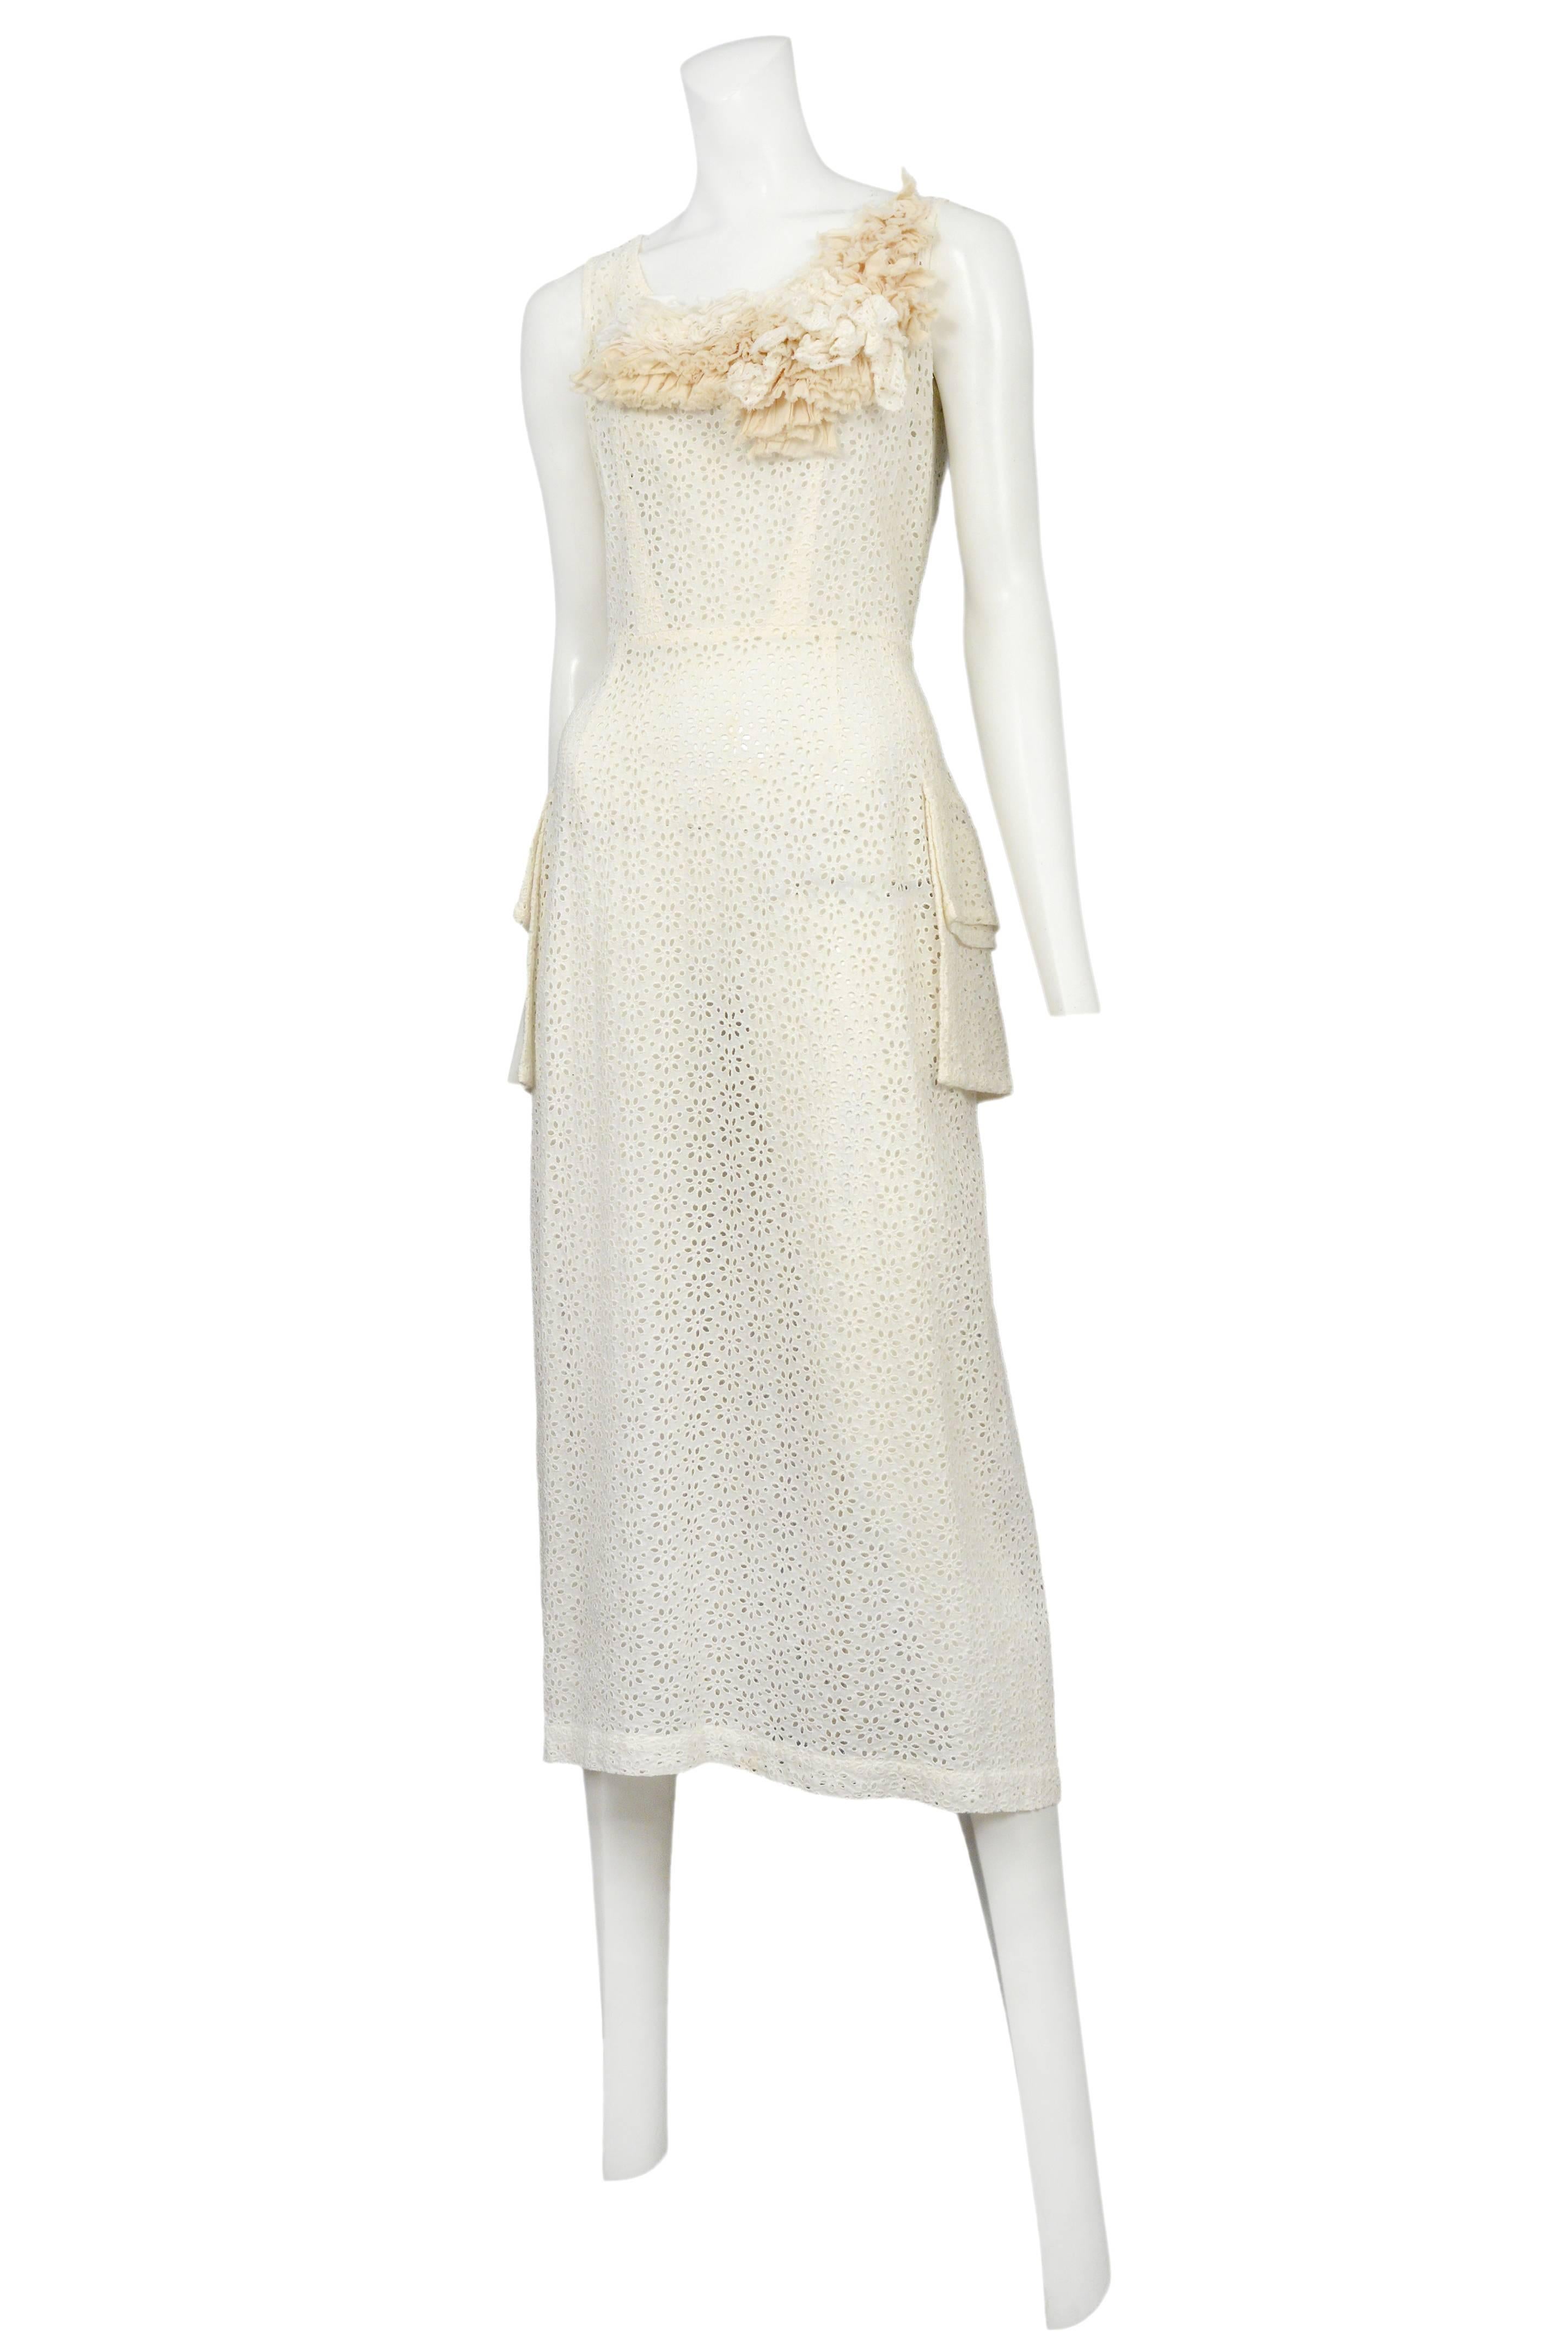 Vintage Comme des Garcons ivory eyelet lace below the knee, sleeveless dress featuring side pockets and gathered fabric adorning the neckline. Circa 1999.
Please inquire for additional images.